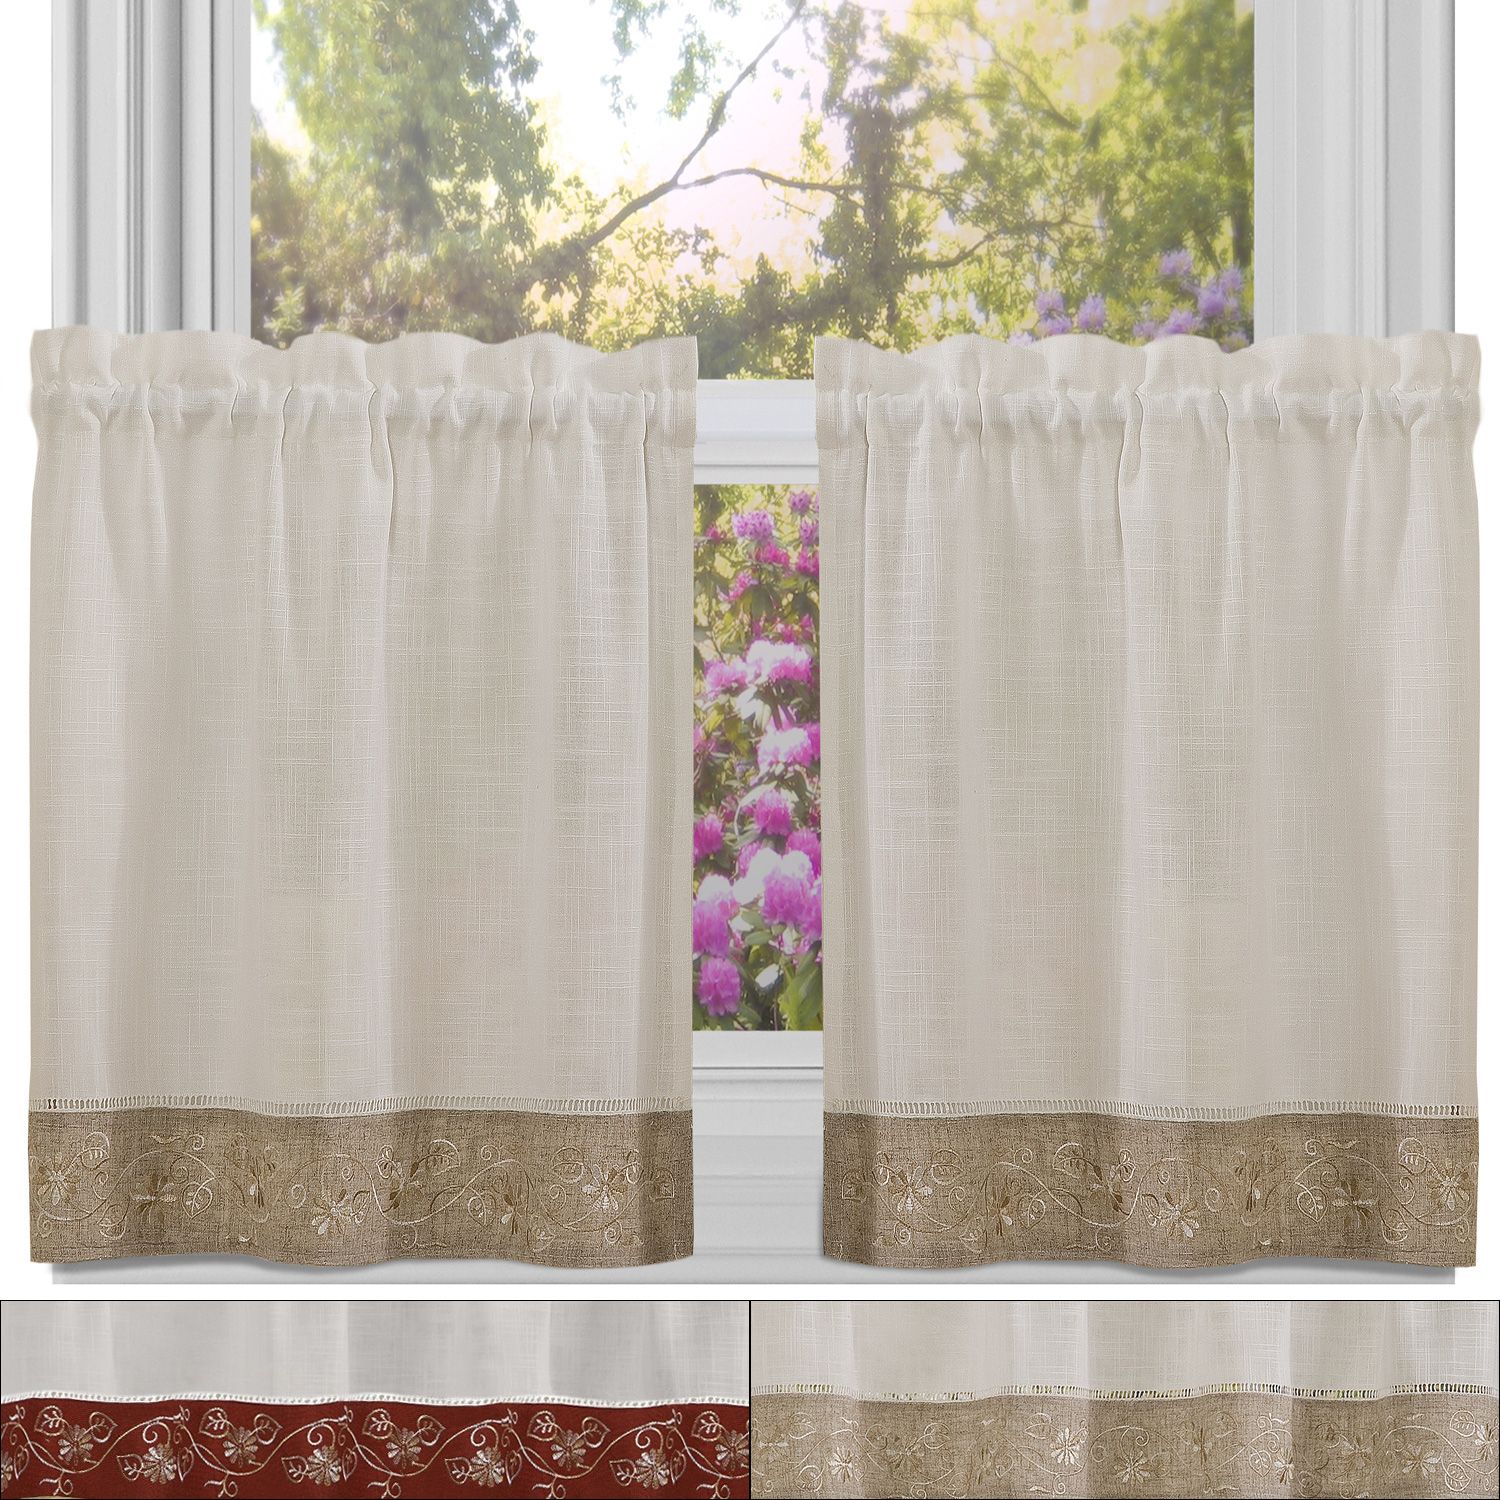 Details About Oakwood Linen Style Kitchen Window Curtain 24" X 58" Tier Pair Pertaining To Oakwood Linen Style Decorative Window Curtain Tier Sets (View 5 of 20)